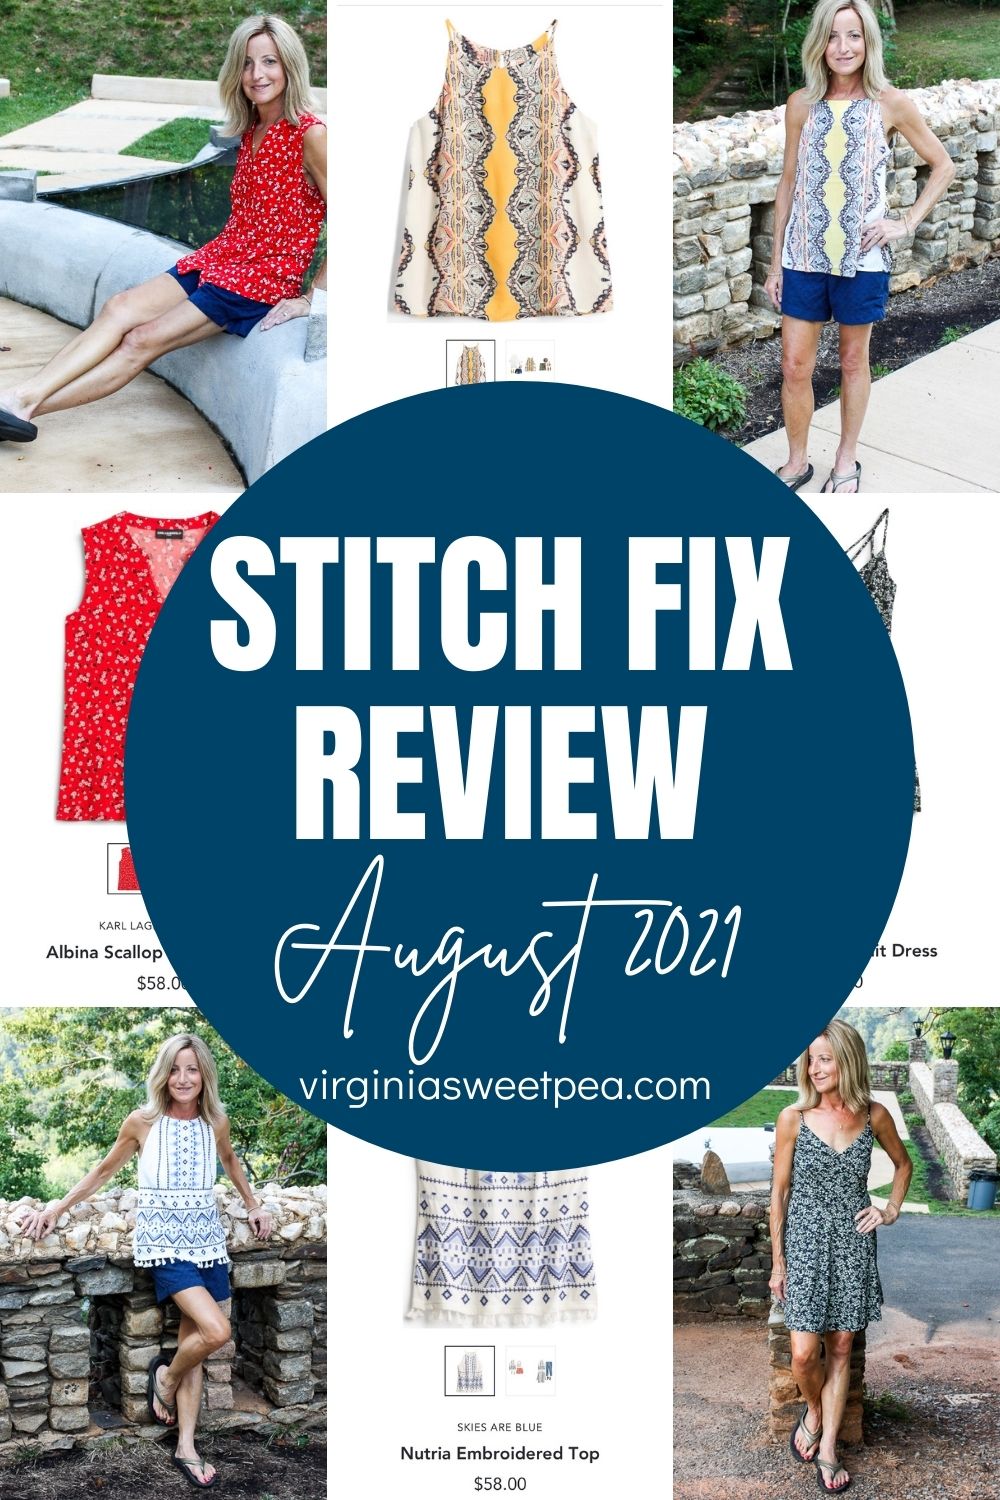 Stitch fix Review for August 2021